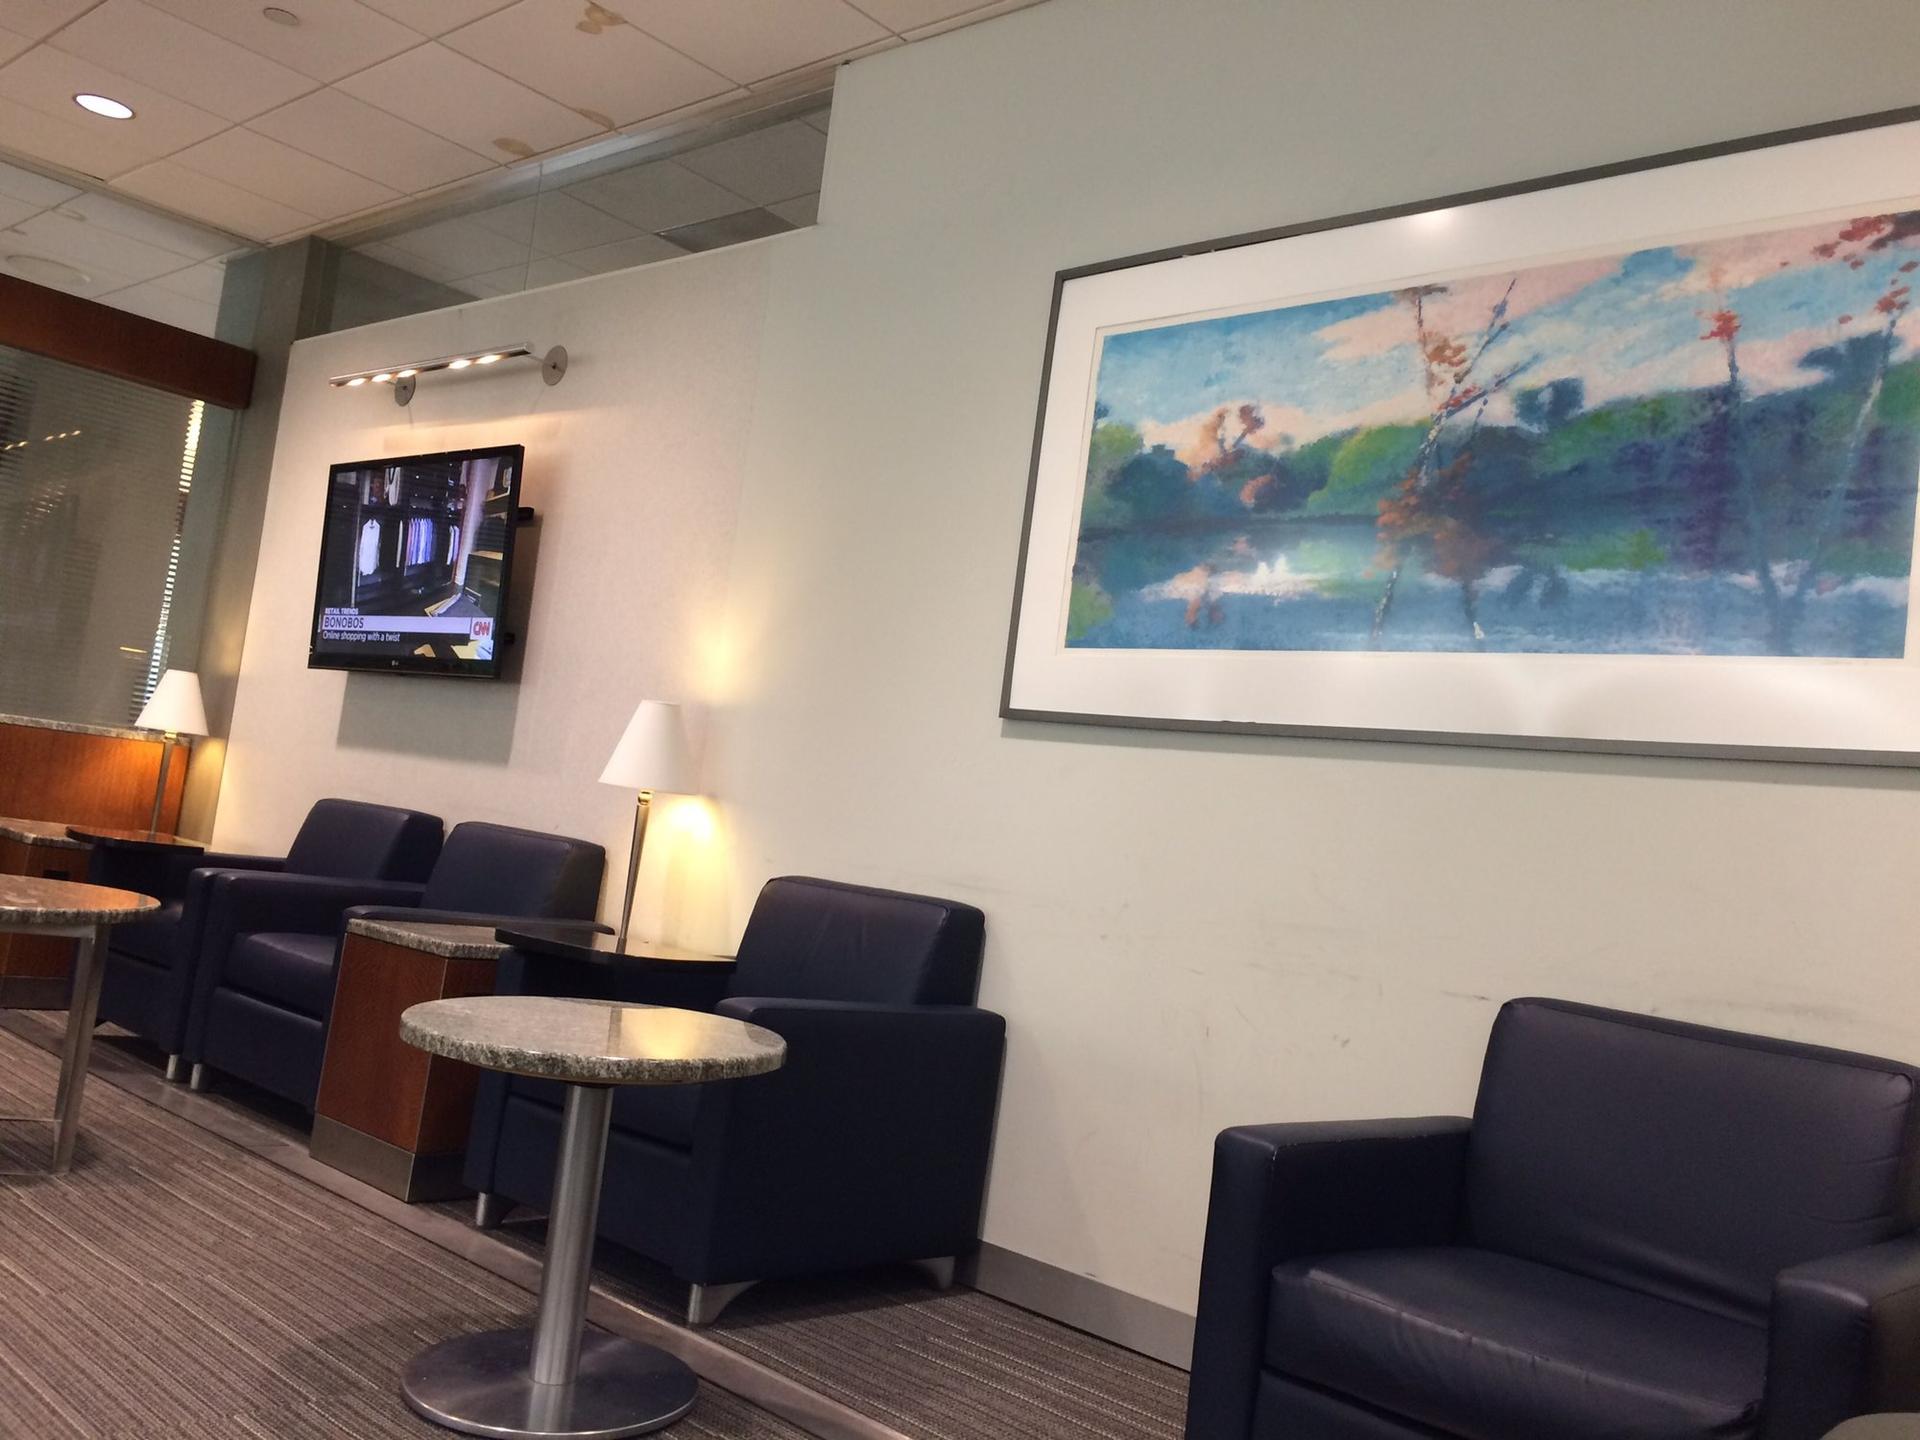 American Airlines Admirals Club image 30 of 48